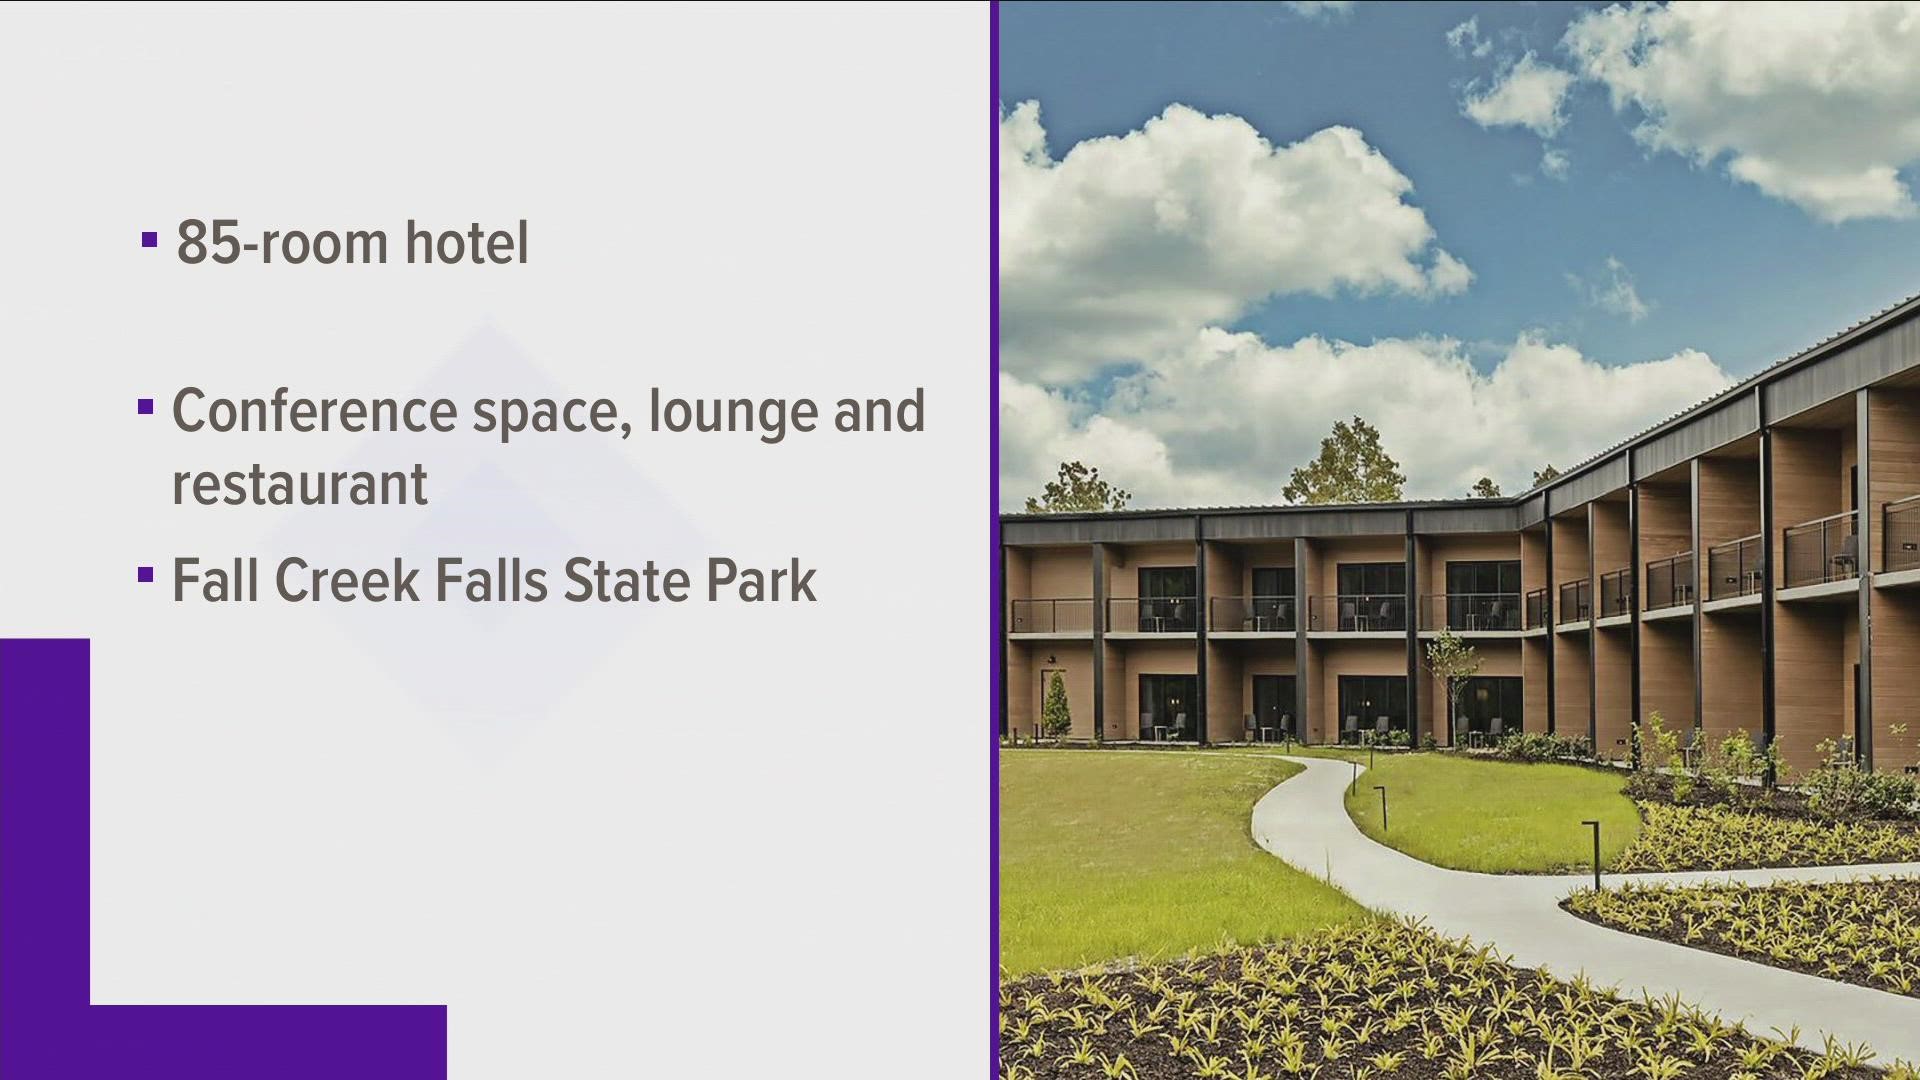 Tennessee State Parks has a new $40 million lodge at Fall Creek Falls.